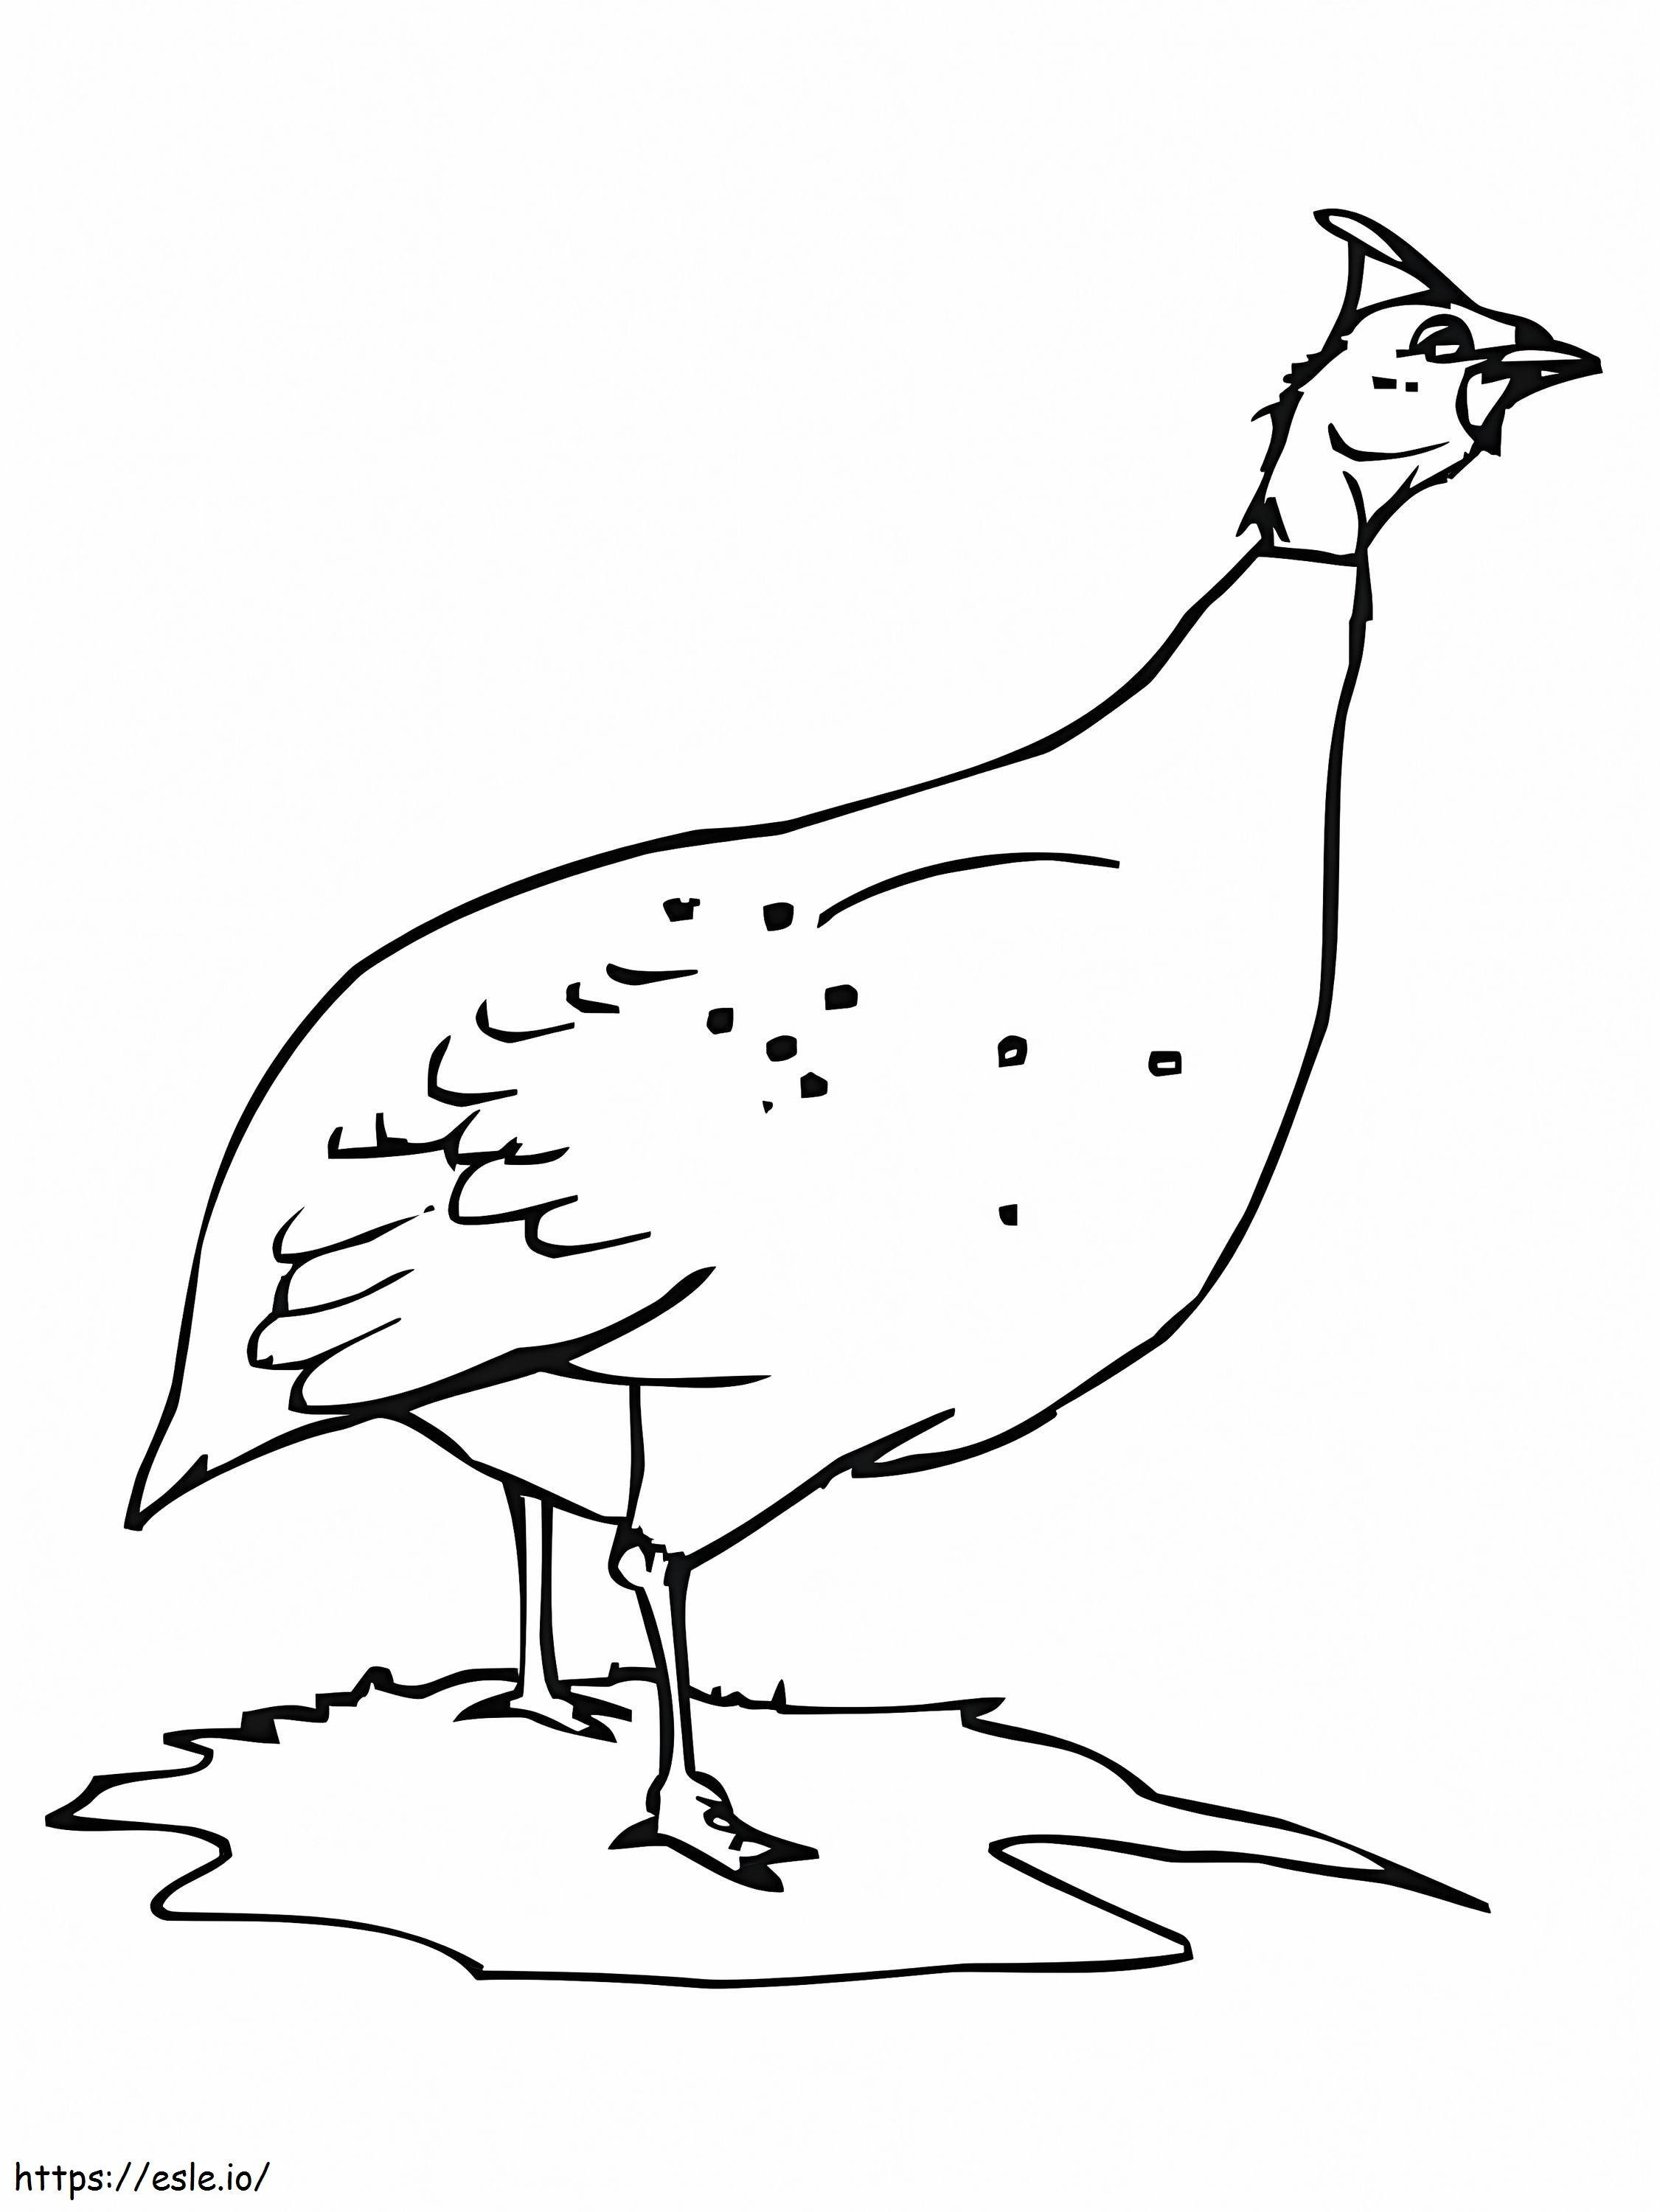 Guinea Fowl Or Hen coloring page